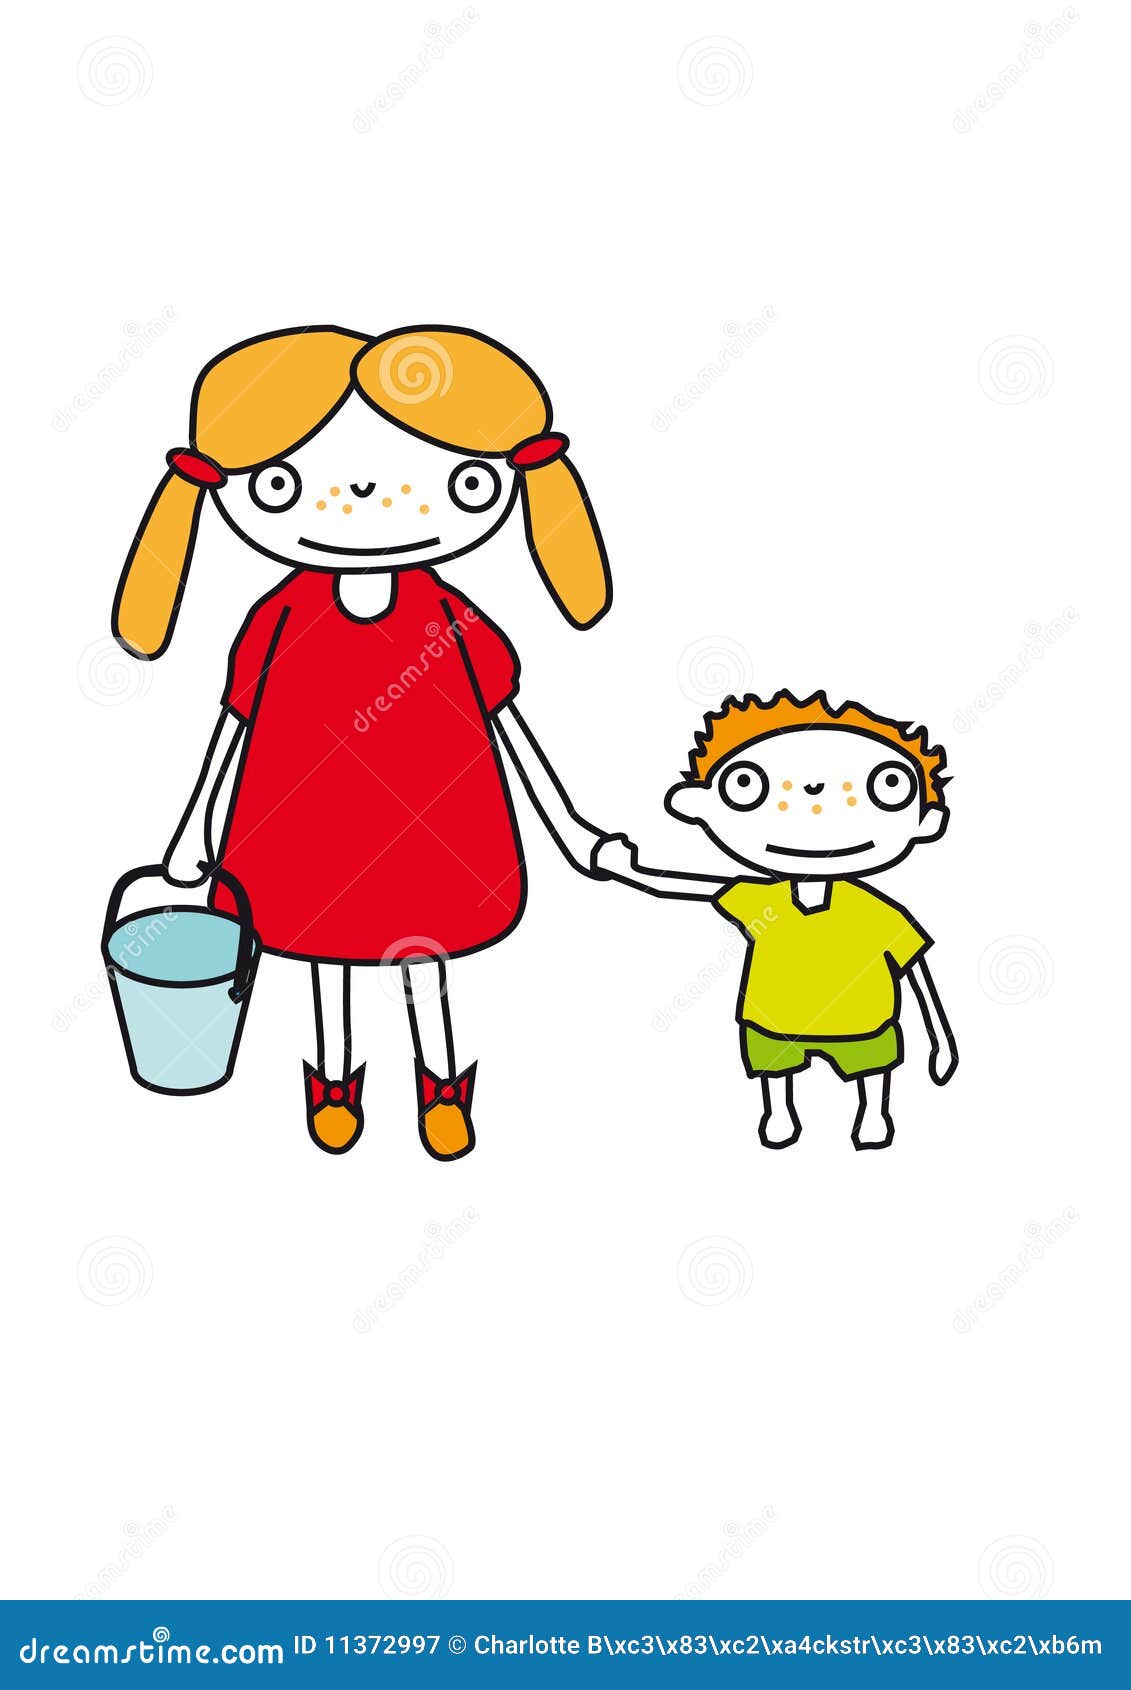 Sister Cartoons, Illustrations & Vector Stock Images - 10975 Pictures